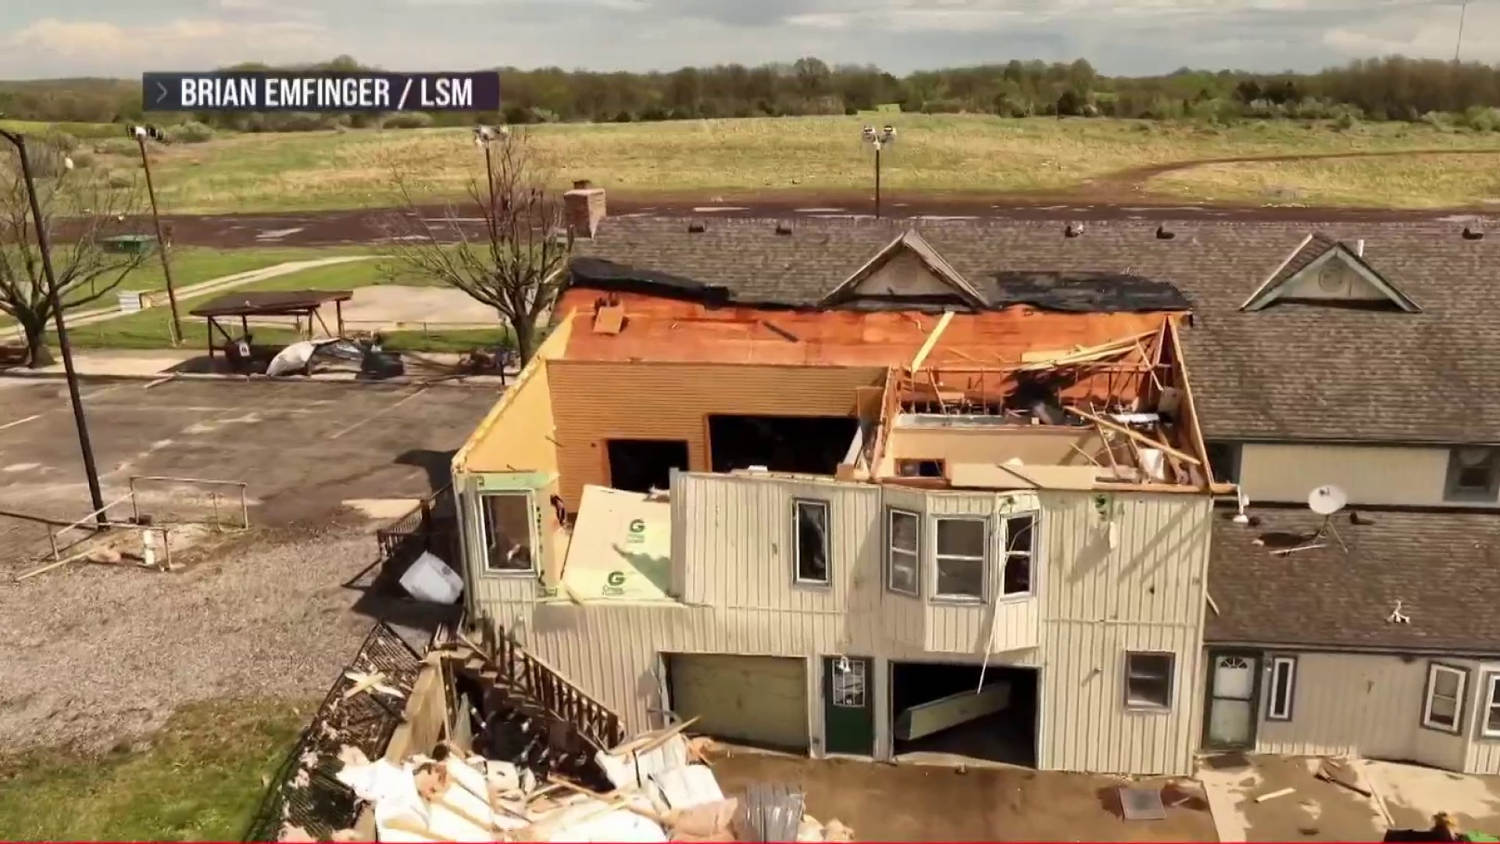 More than 20 tornadoes reported as tens of millions face severe
weather threat